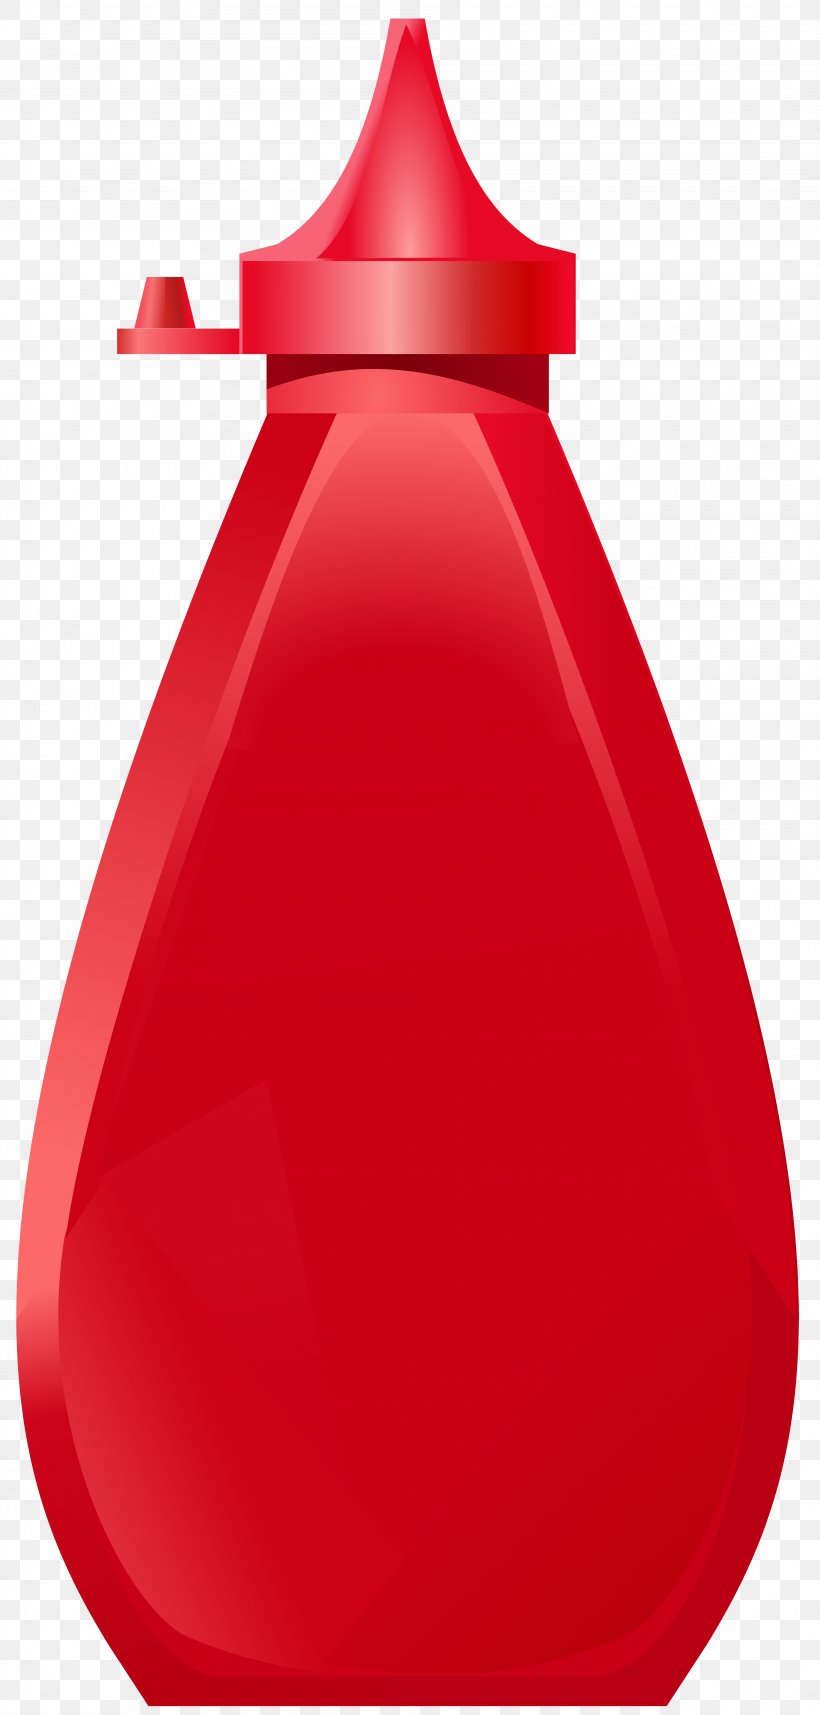 Ketchup Bottle Clip Art, PNG, 3825x8000px, Fast Food, Bottle, Food, H J Heinz Company, Heinz Tomato Ketchup Download Free